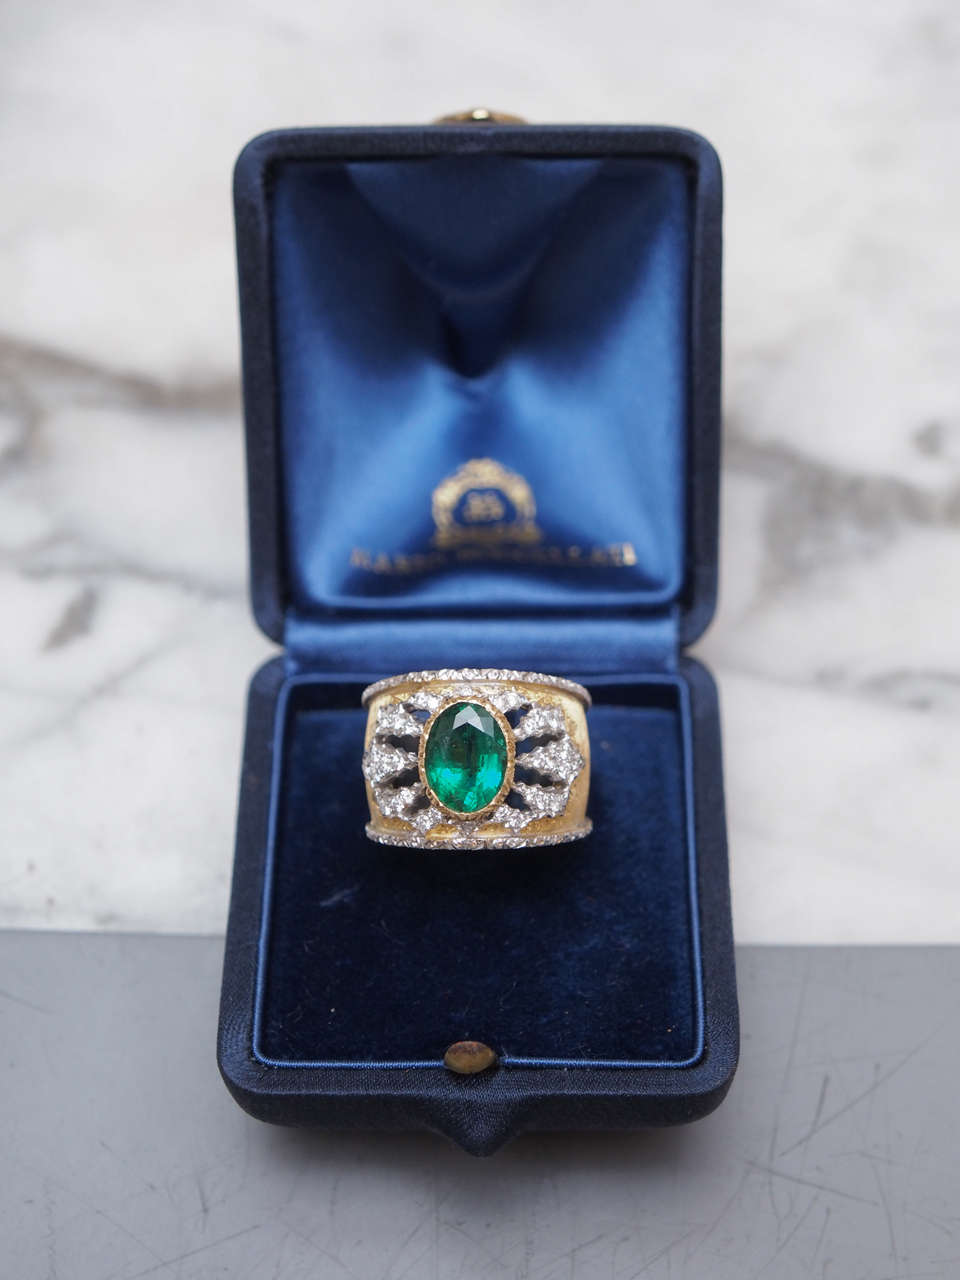 Exceptional Signed Mario Buccellati  Emerald and Diamond Ring. Crafted in 18kt Gold Containing a 1.55 Carat Oval Emerald and Pave Diamonds